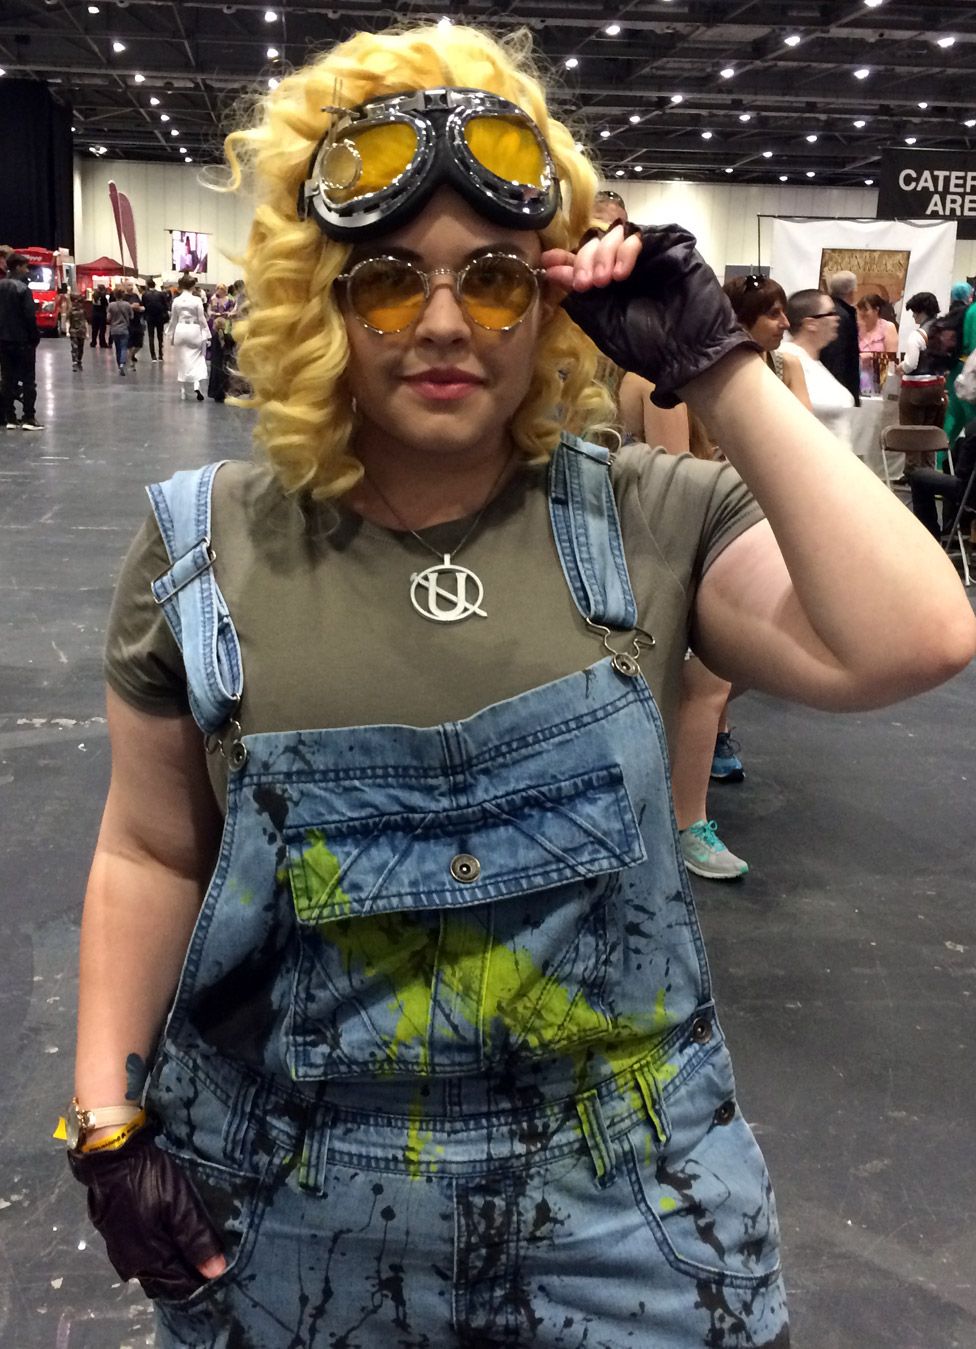 Emily Hopkins - as Jillian Holtzmann from the Ghostbusters remake